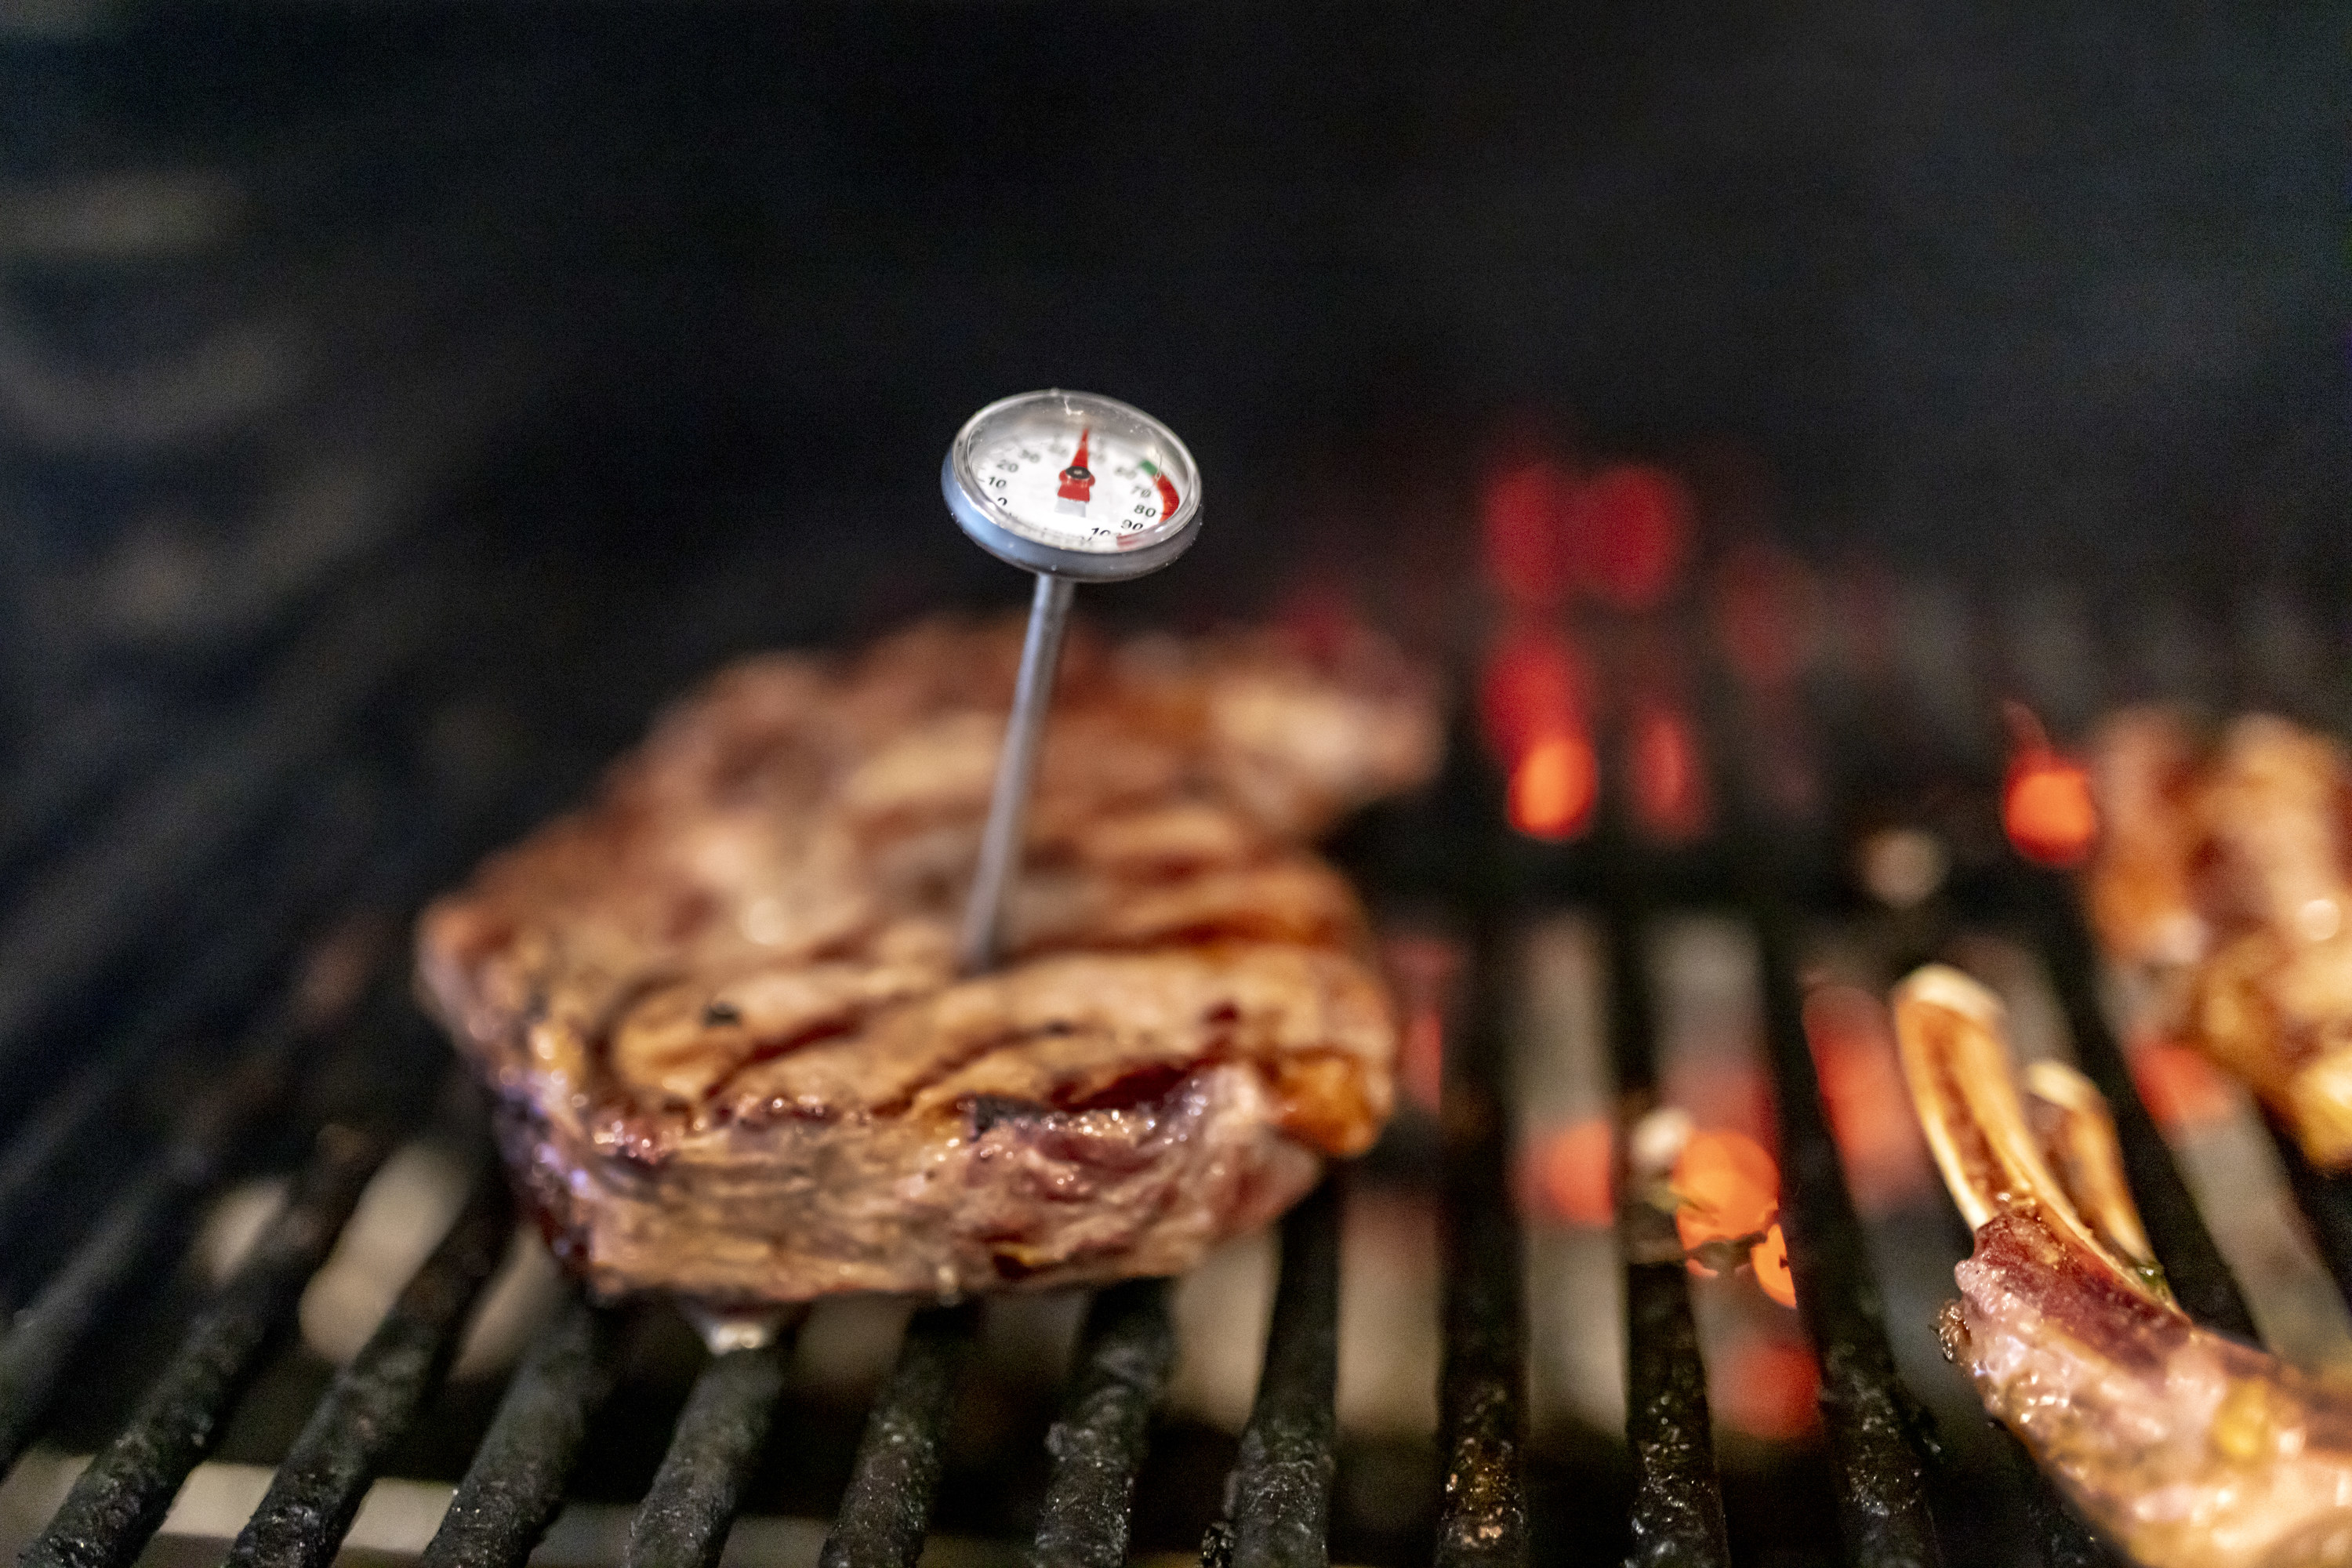 Thermometer placed in a steak